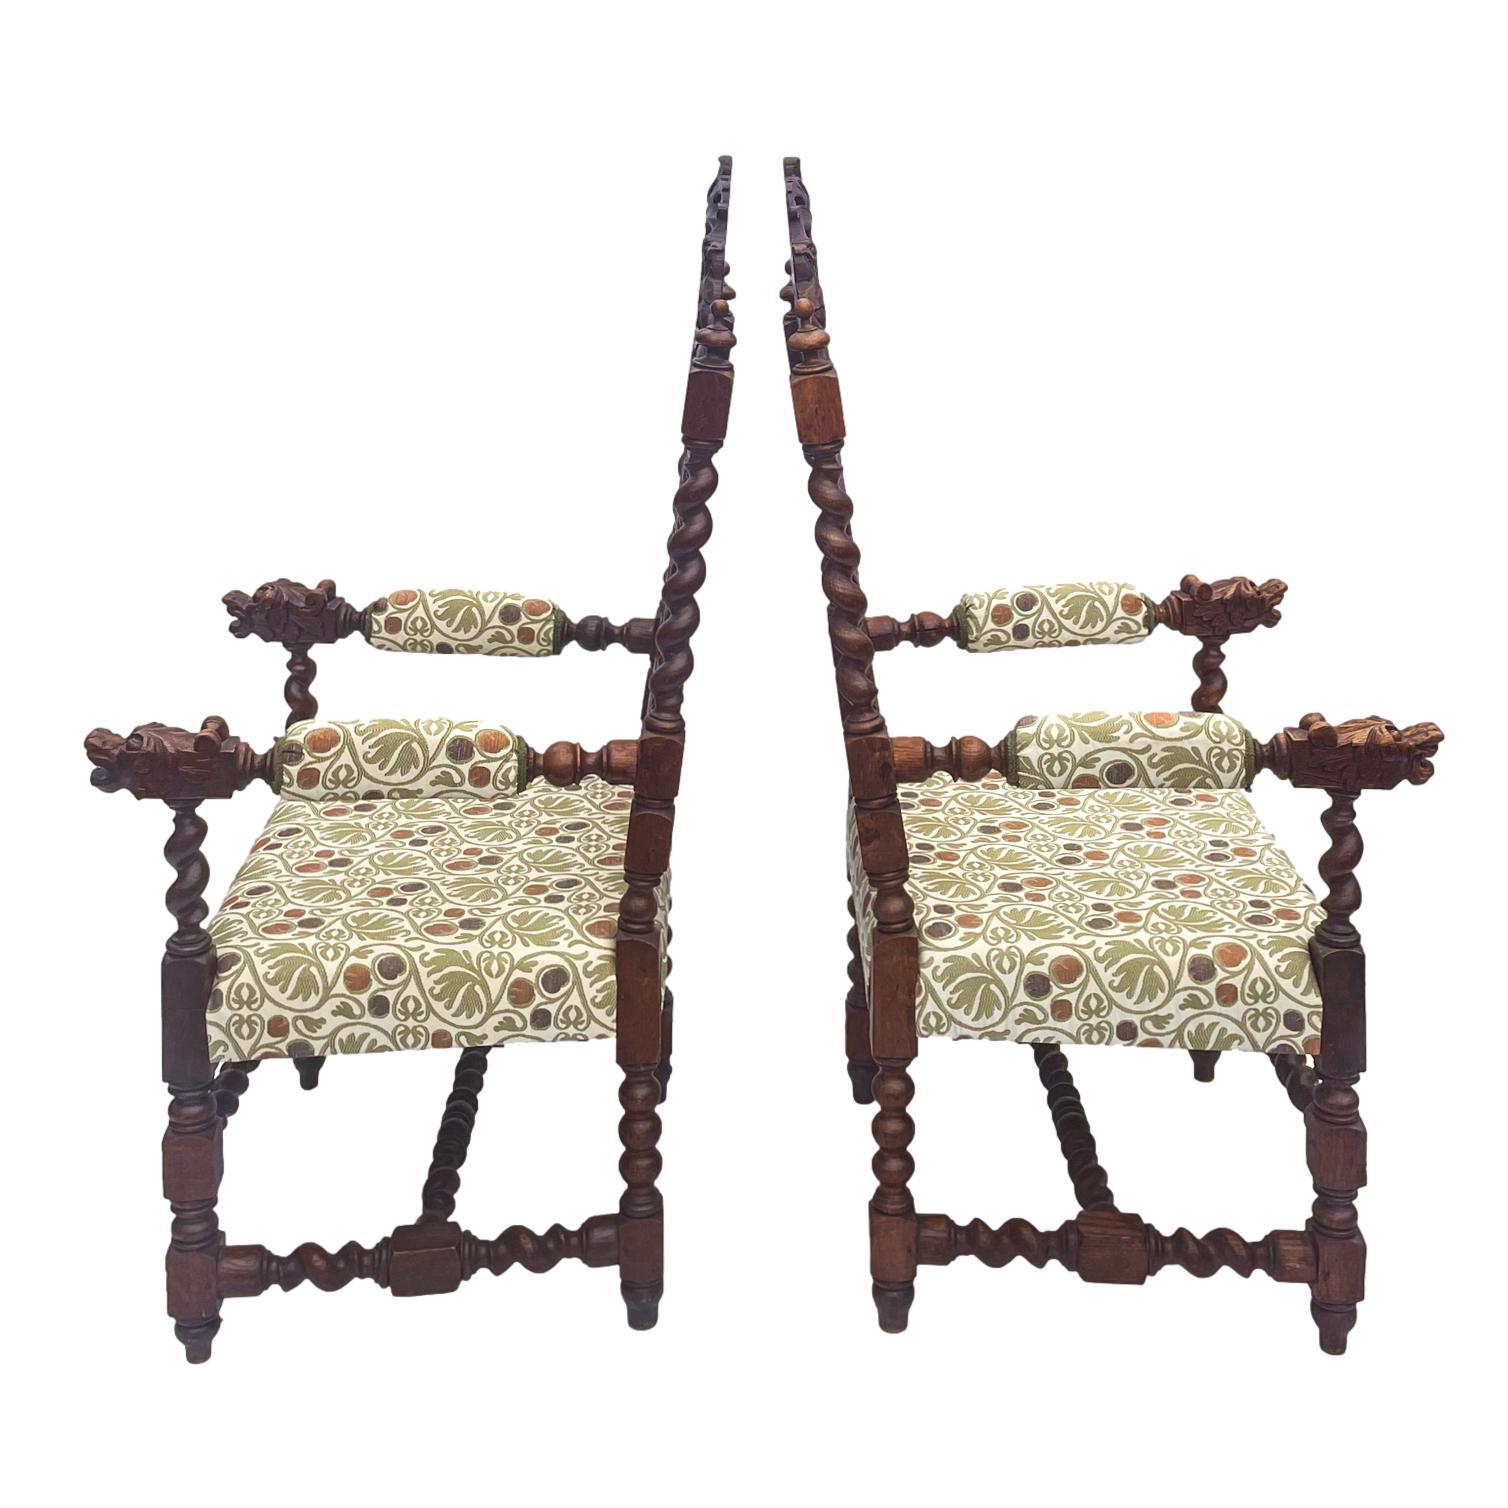 A pair of oak armchairs carved with grotesque carved heads, barley twist turned posts, and stretcher base, the caned backs framed by foliate carving and further barley twist turnings terminating with finials, English, circa 1880.